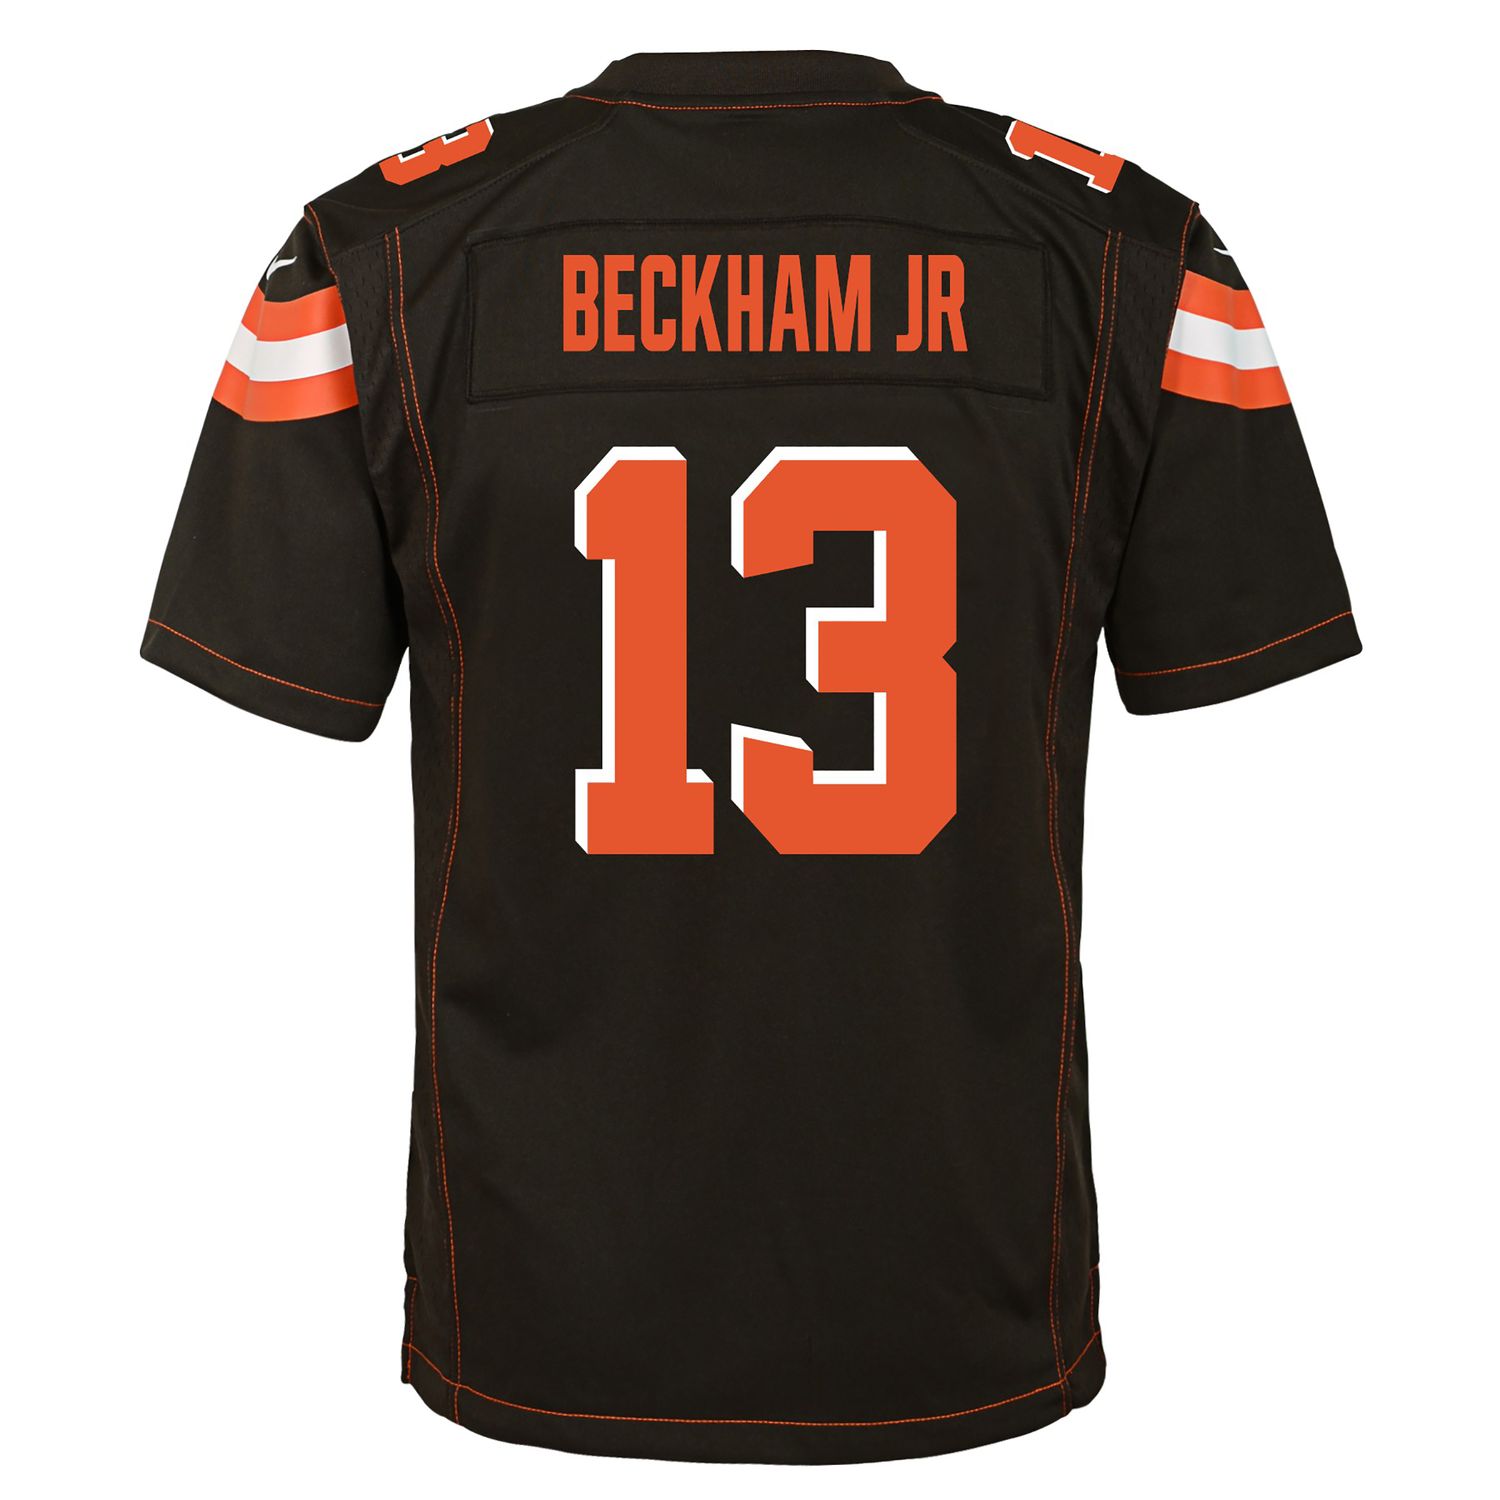 the browns jersey